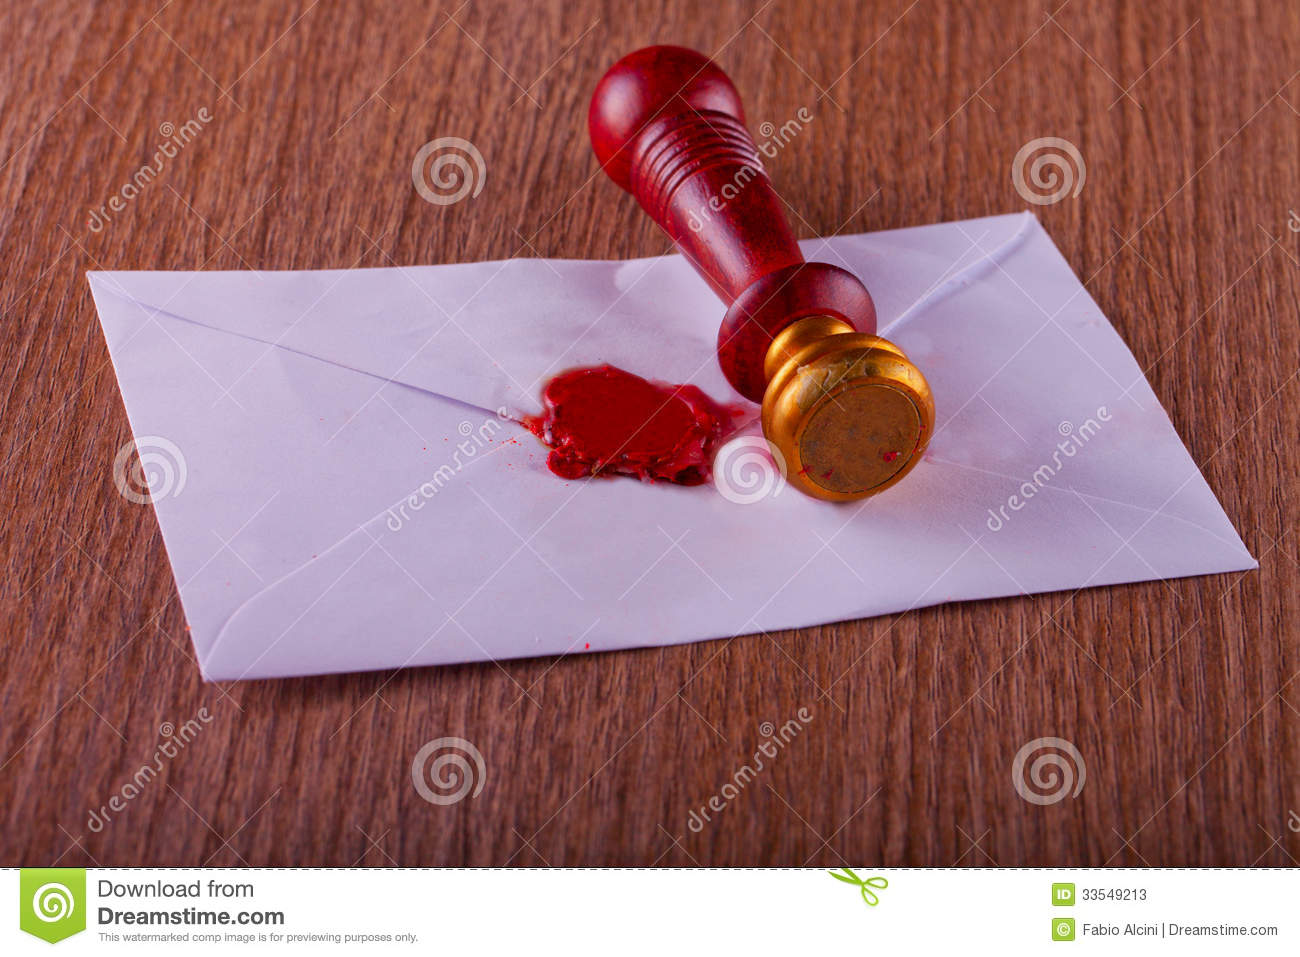 Sealing Wax Stamp On A Letter Stock Photos   Image  33549213